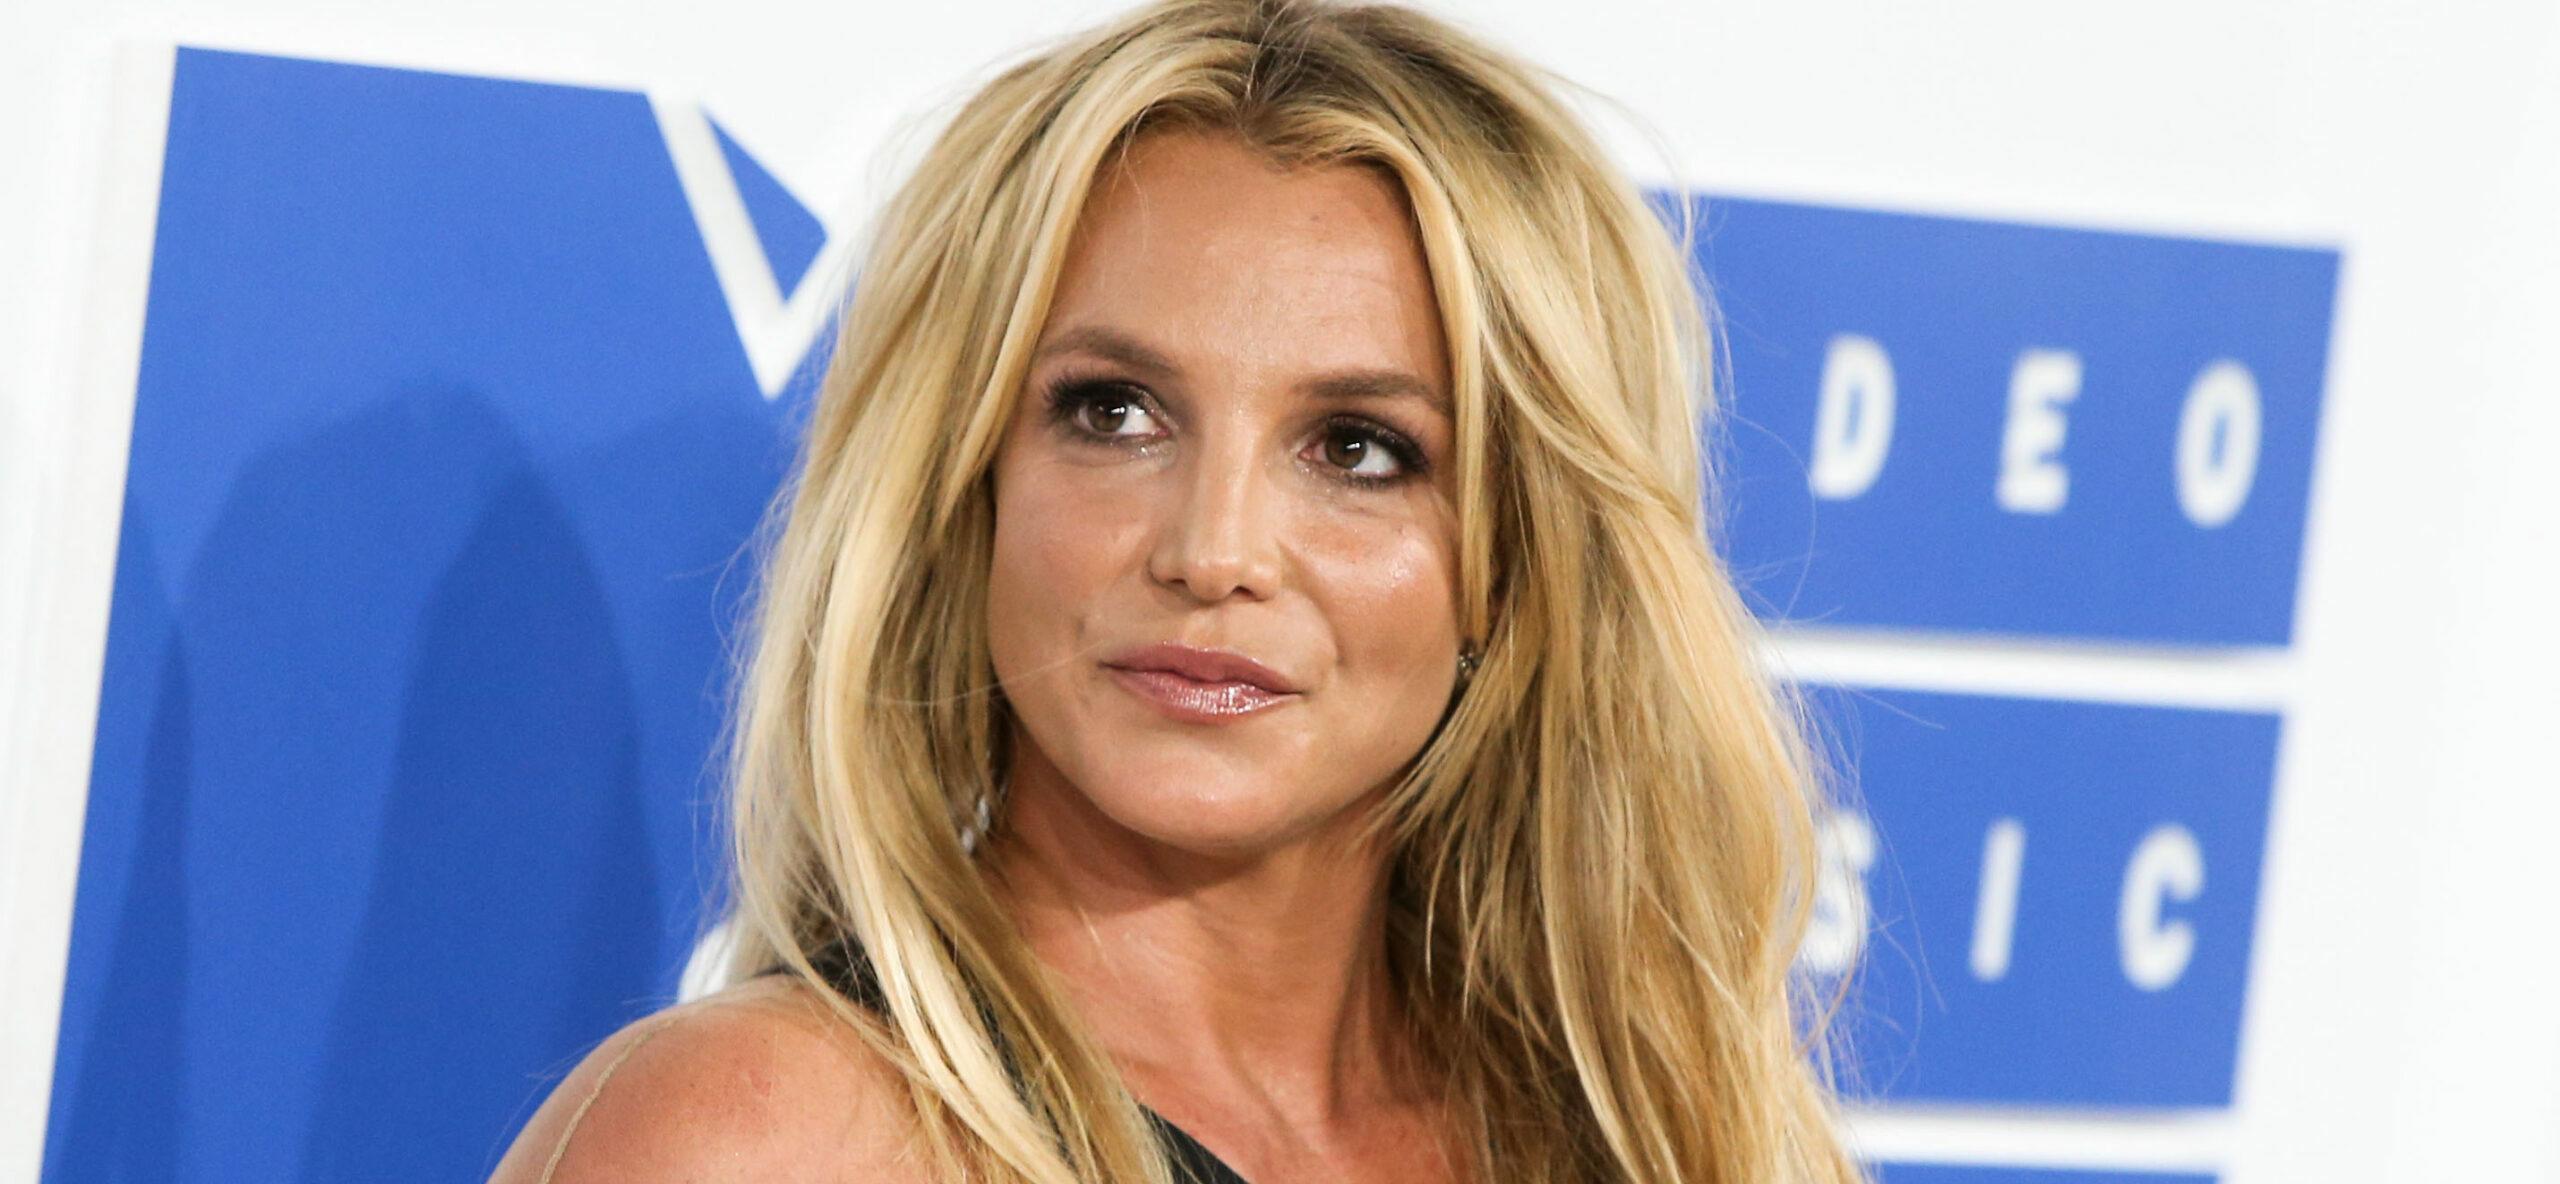 Britney Spears Says She Hasn’t ‘Prayed For Something More’ As Conservatorship Hearing Approaches